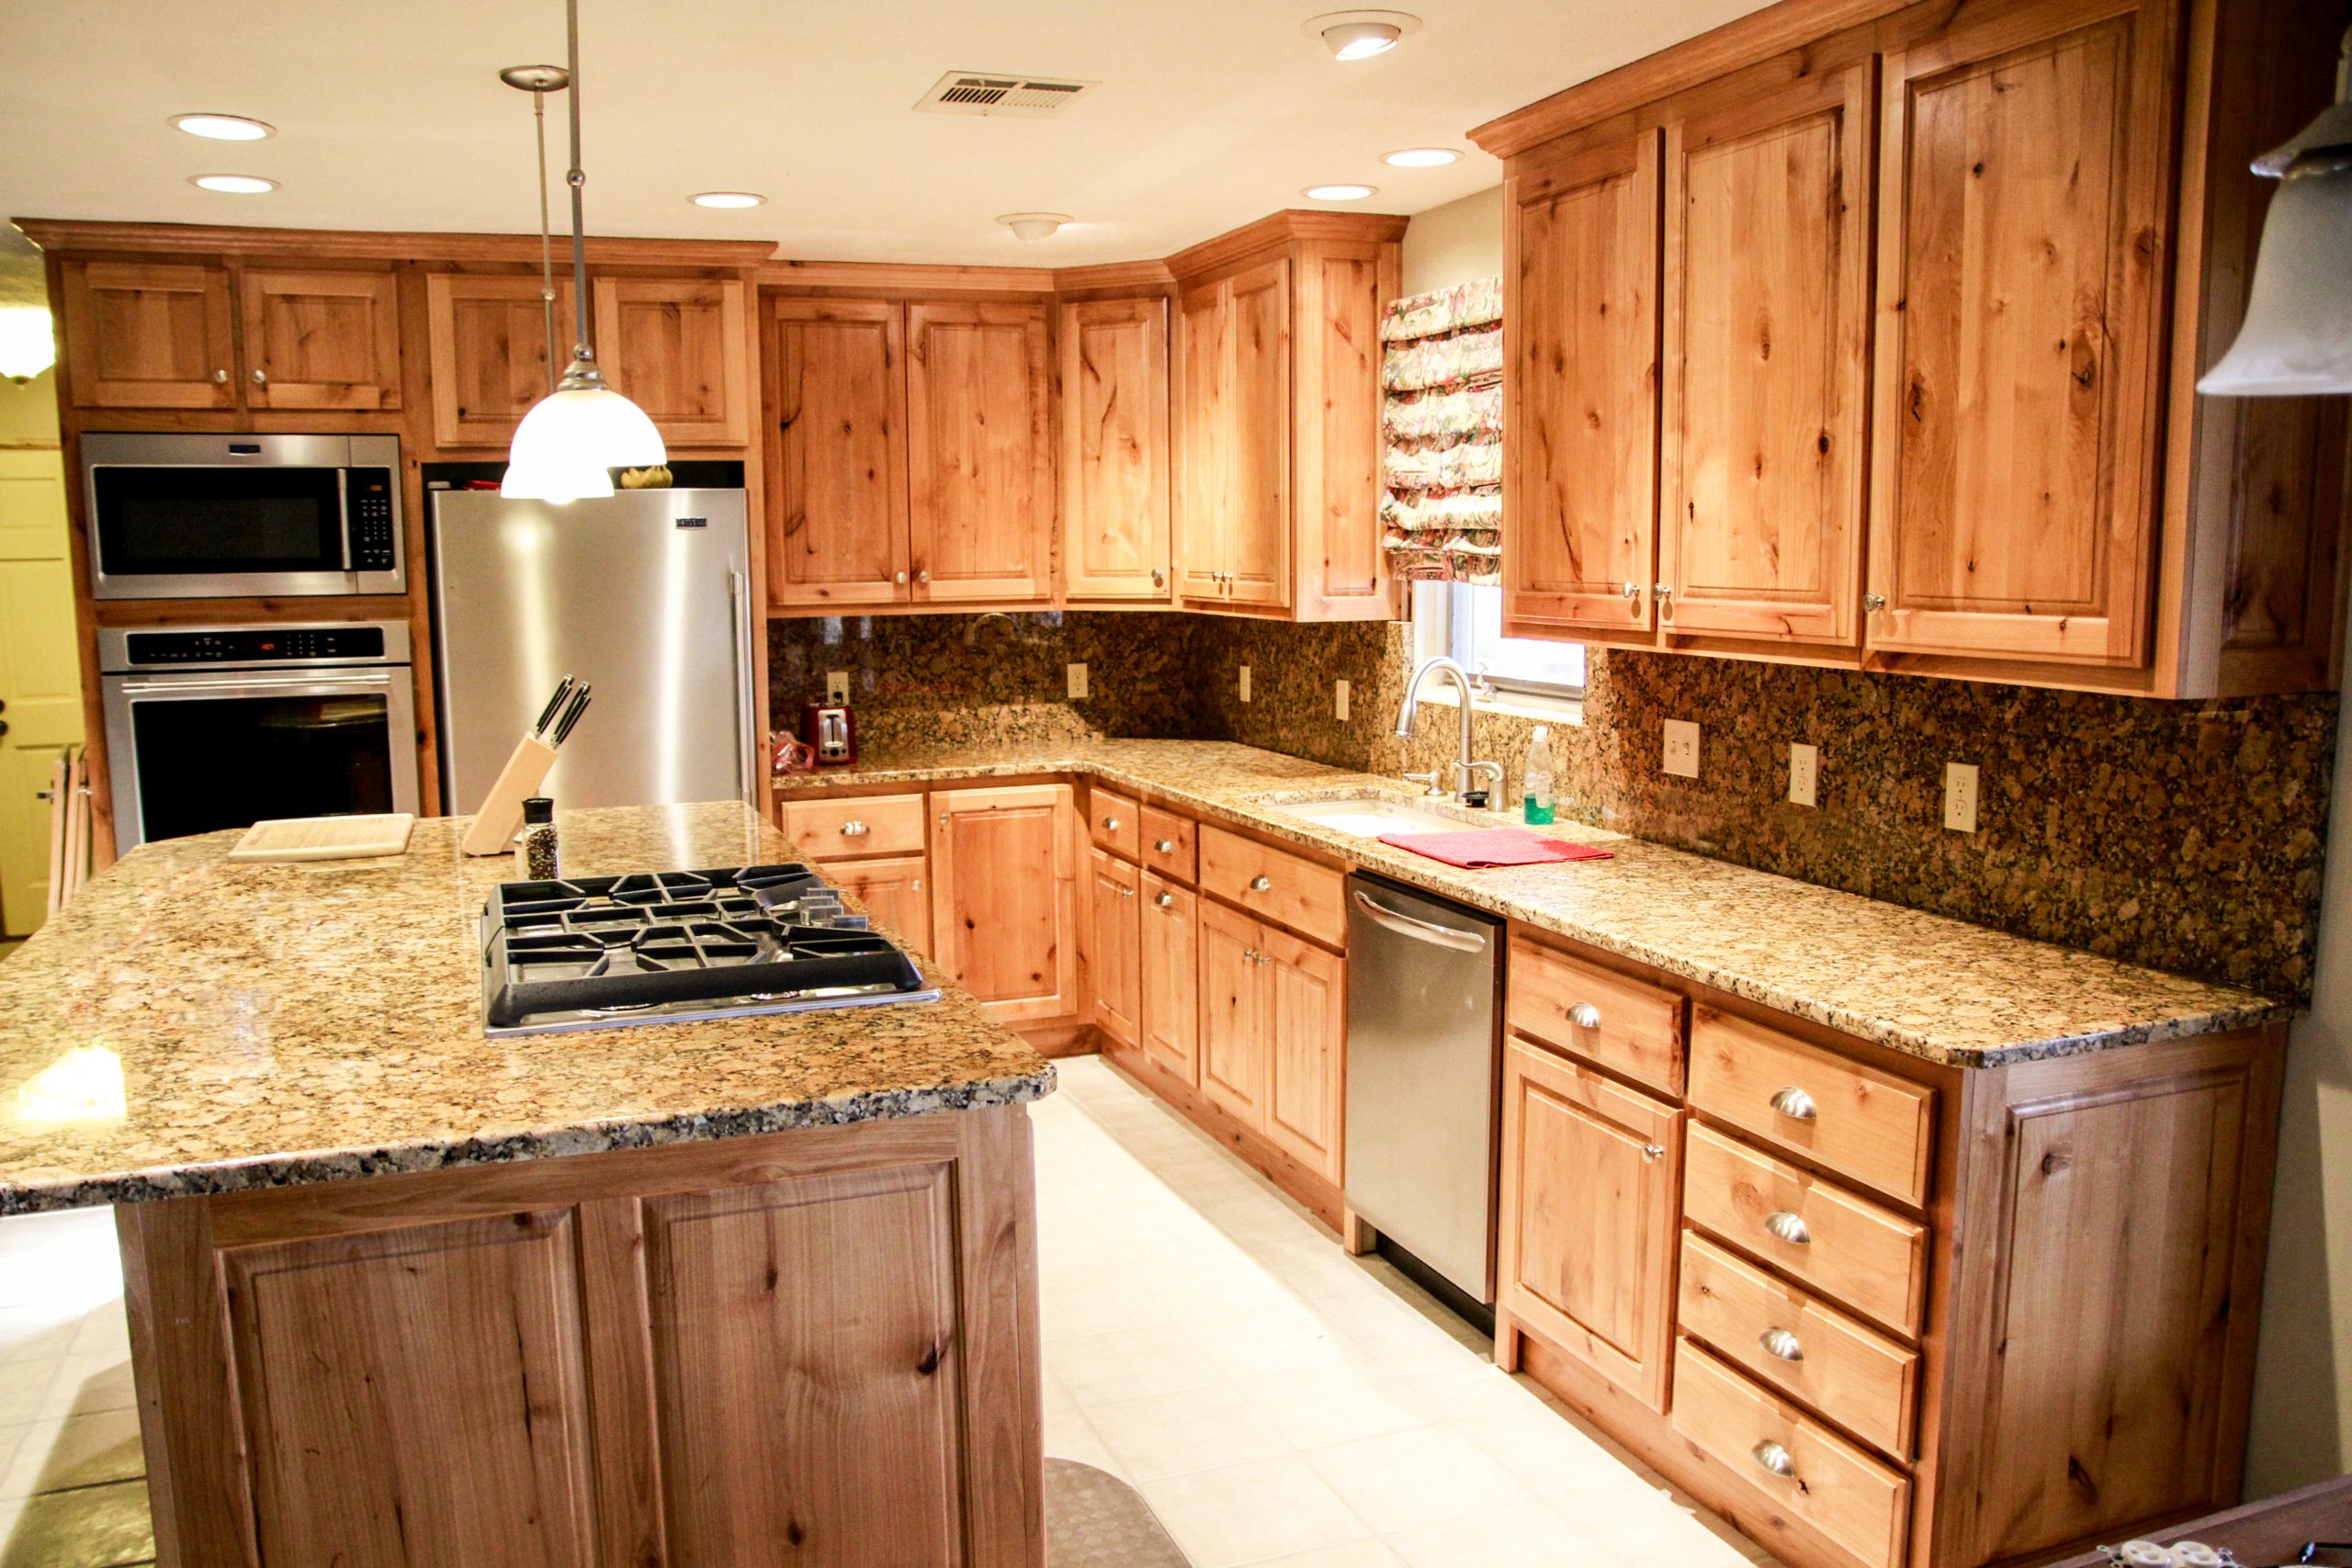 Farmhouse Kitchen Cabinets in Atlantic Highlands NJ, Buy custom kitchen cabinets factory direct in Atlantic Highlands NJ, Buy custom shaker cabinets factory direct in Atlantic Highlands NJ